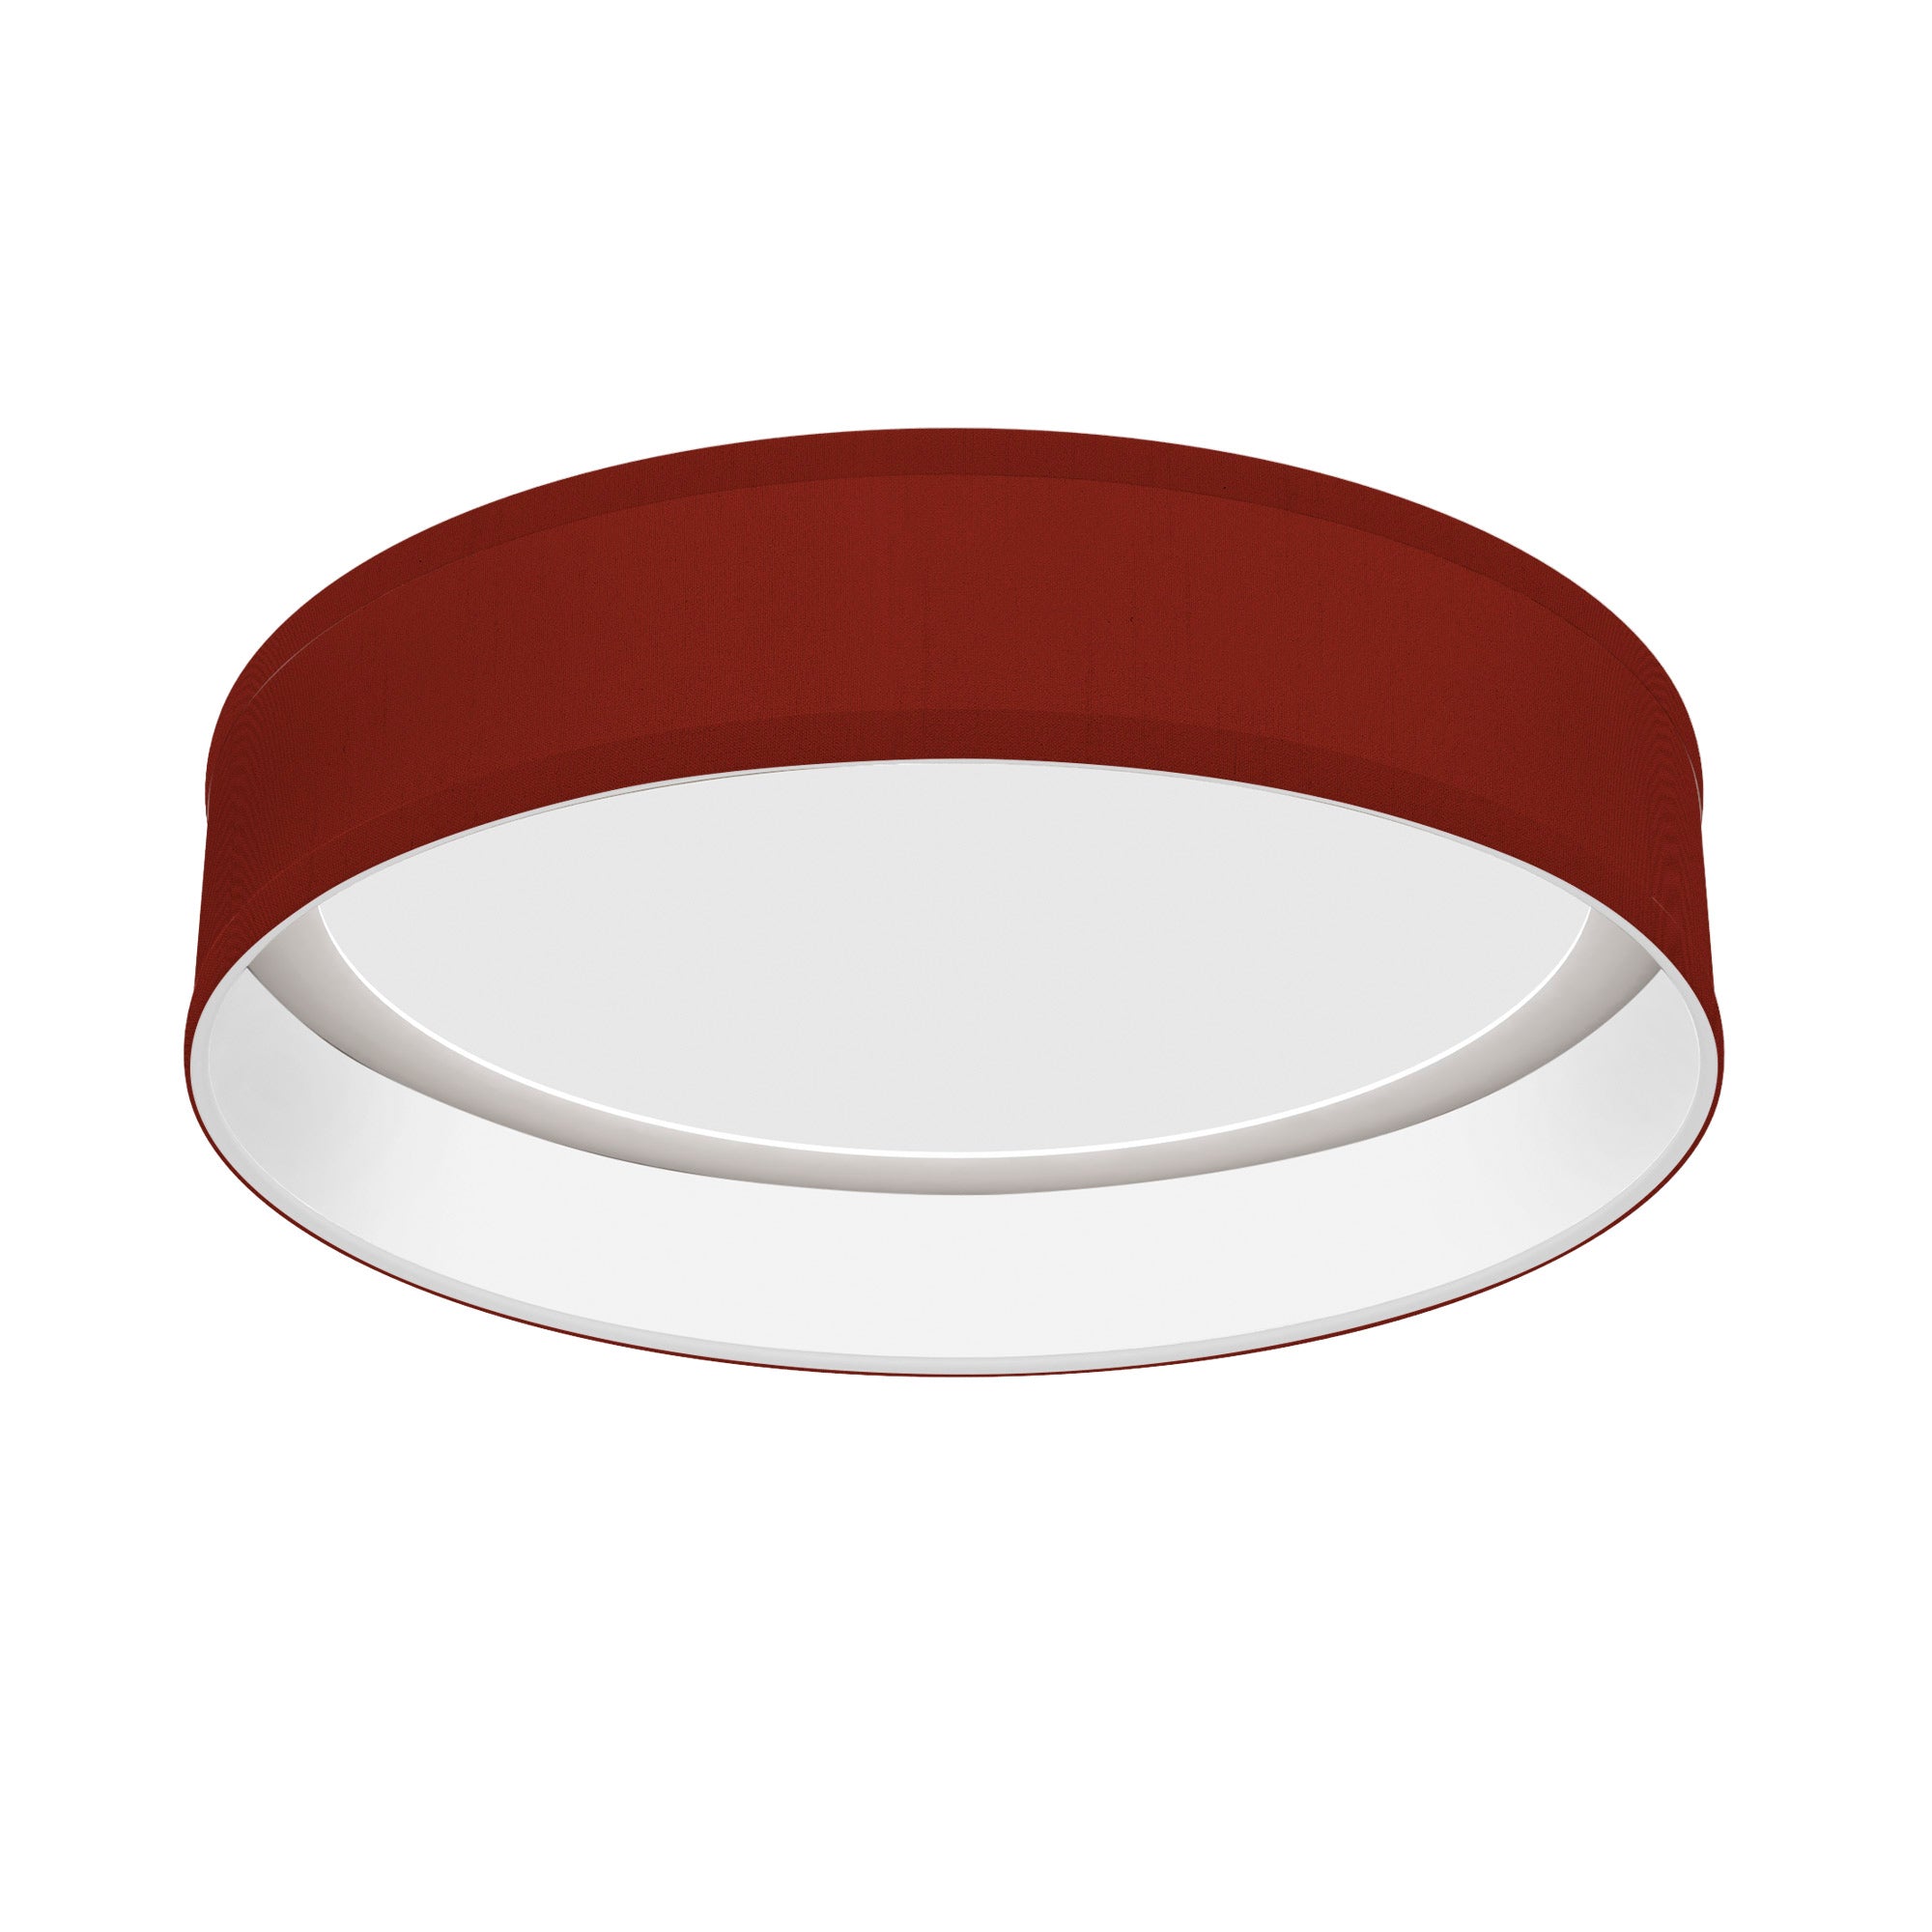 The Vince Flush Mount from Seascape Fixtures with a silk shade in burgundy color.